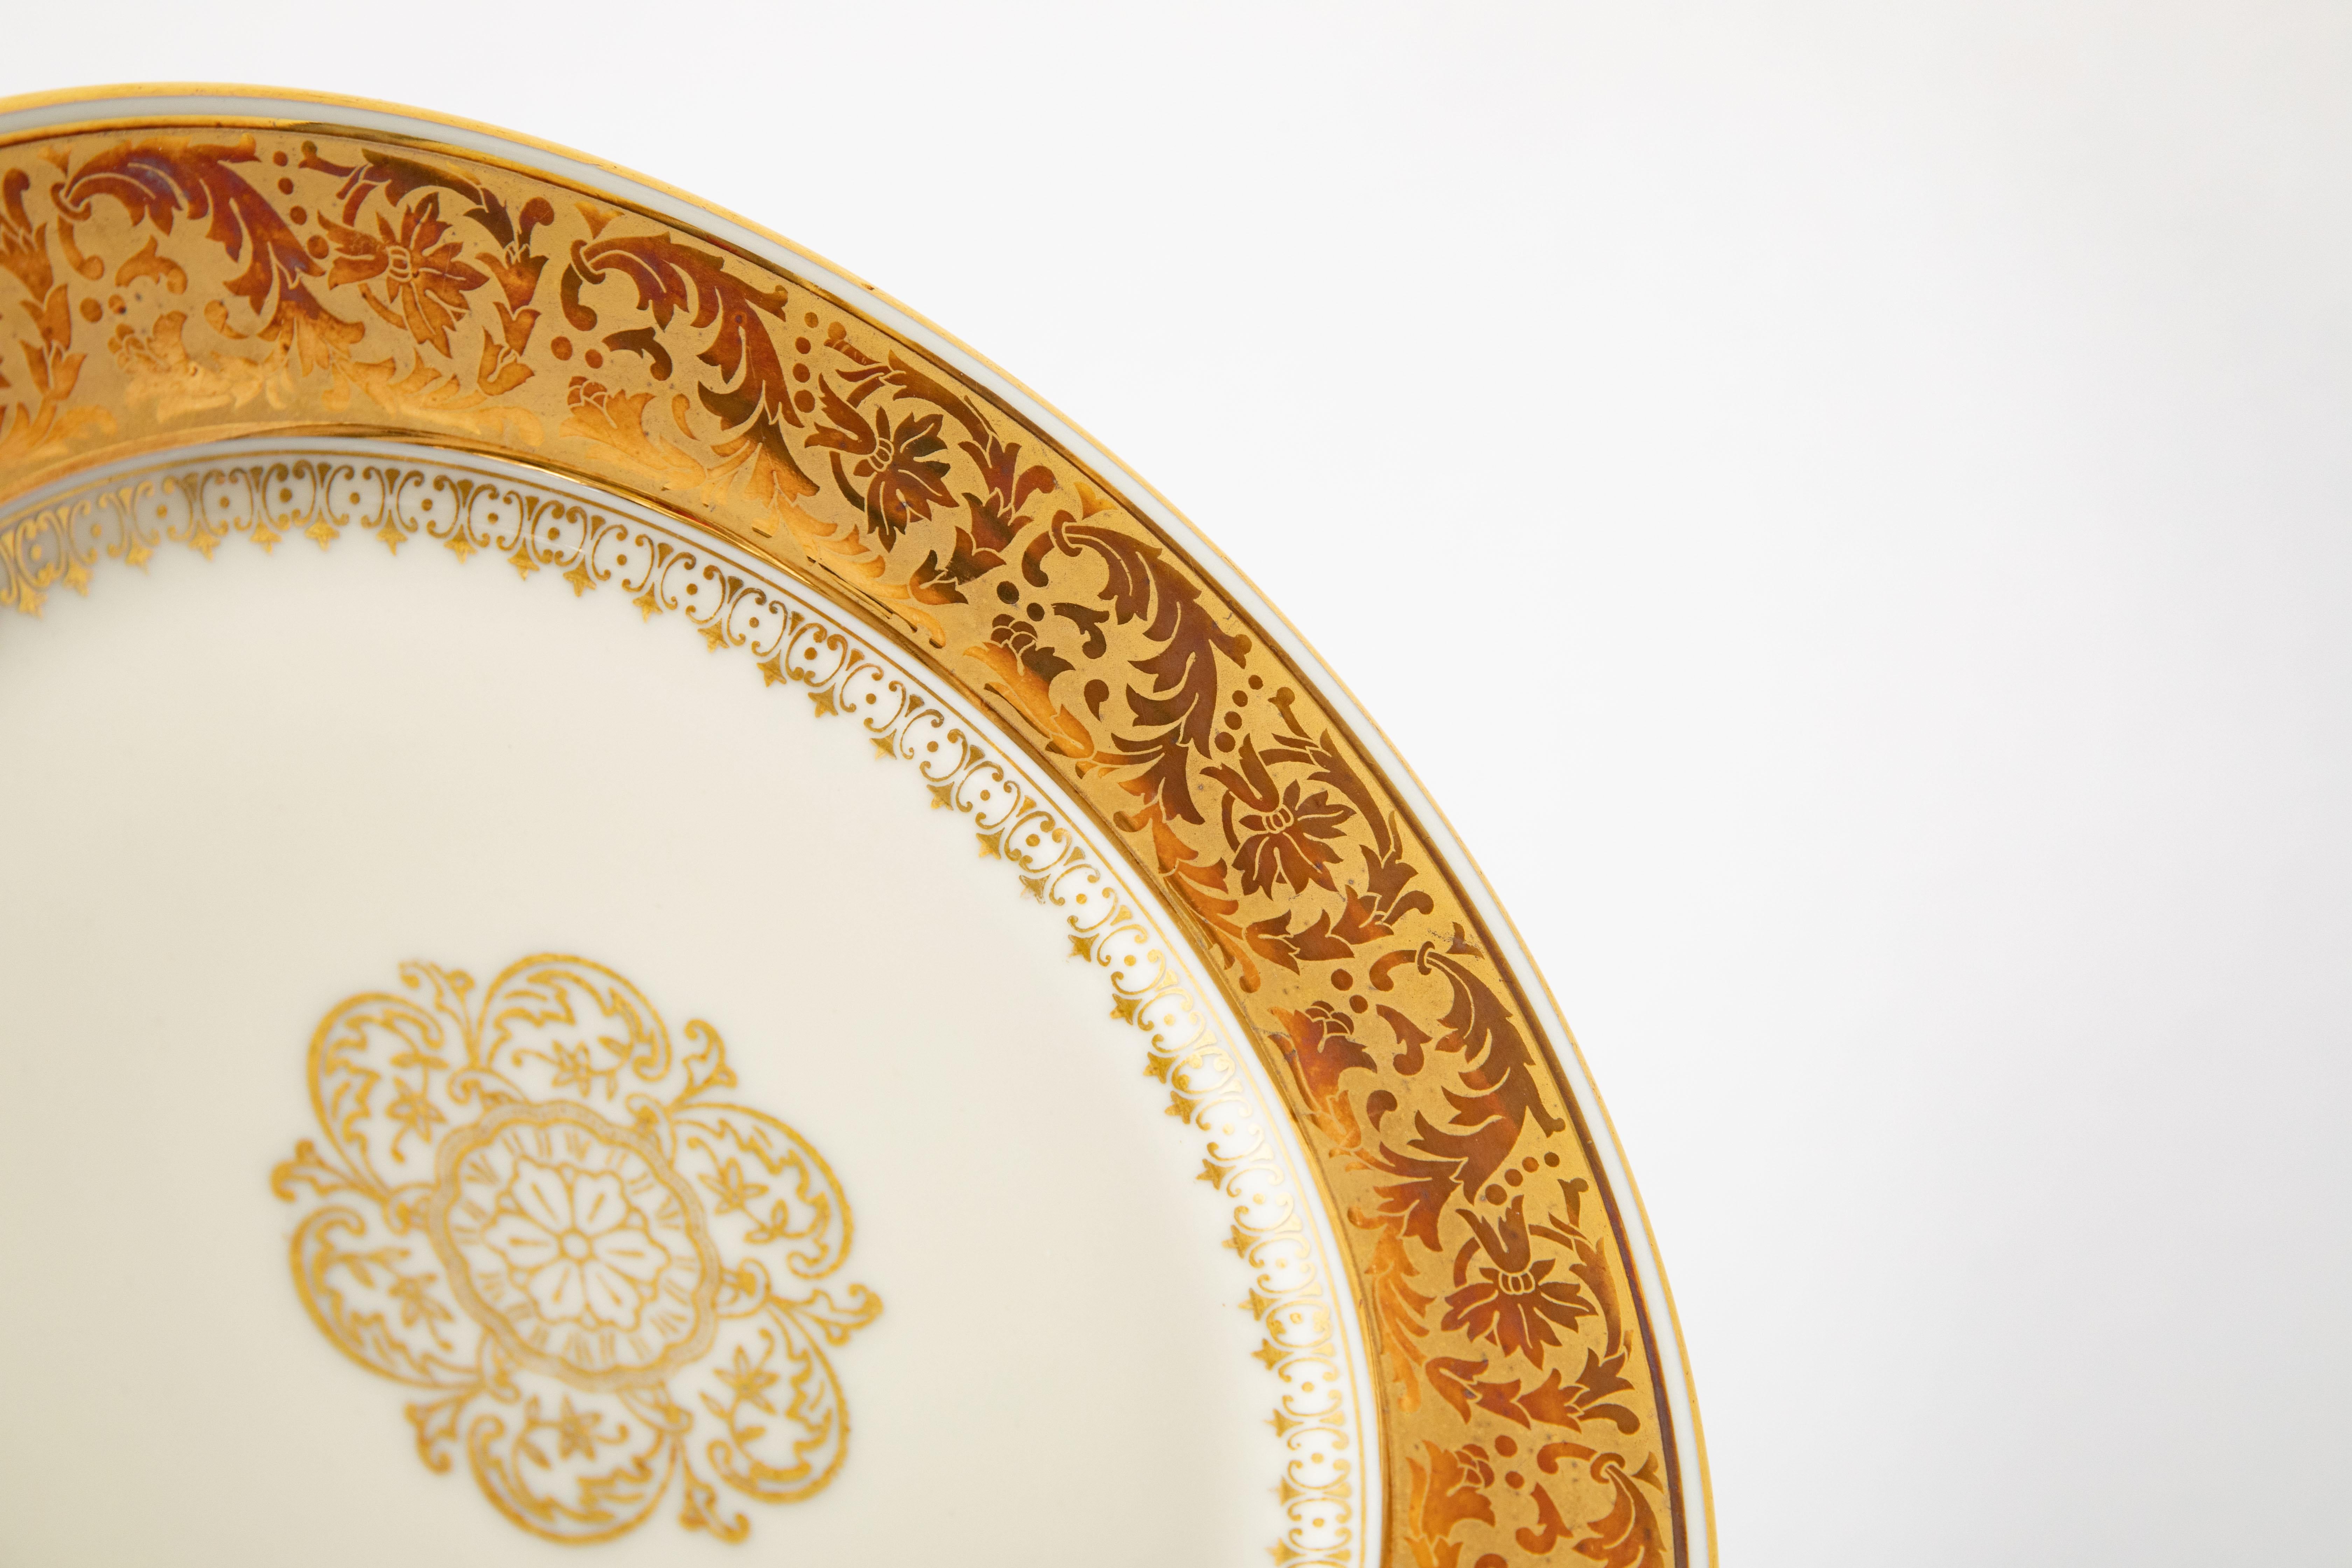 German Antique Wide Gold Trim Dinner Service with 22 Dinner Plates, 56 Pieces Total For Sale